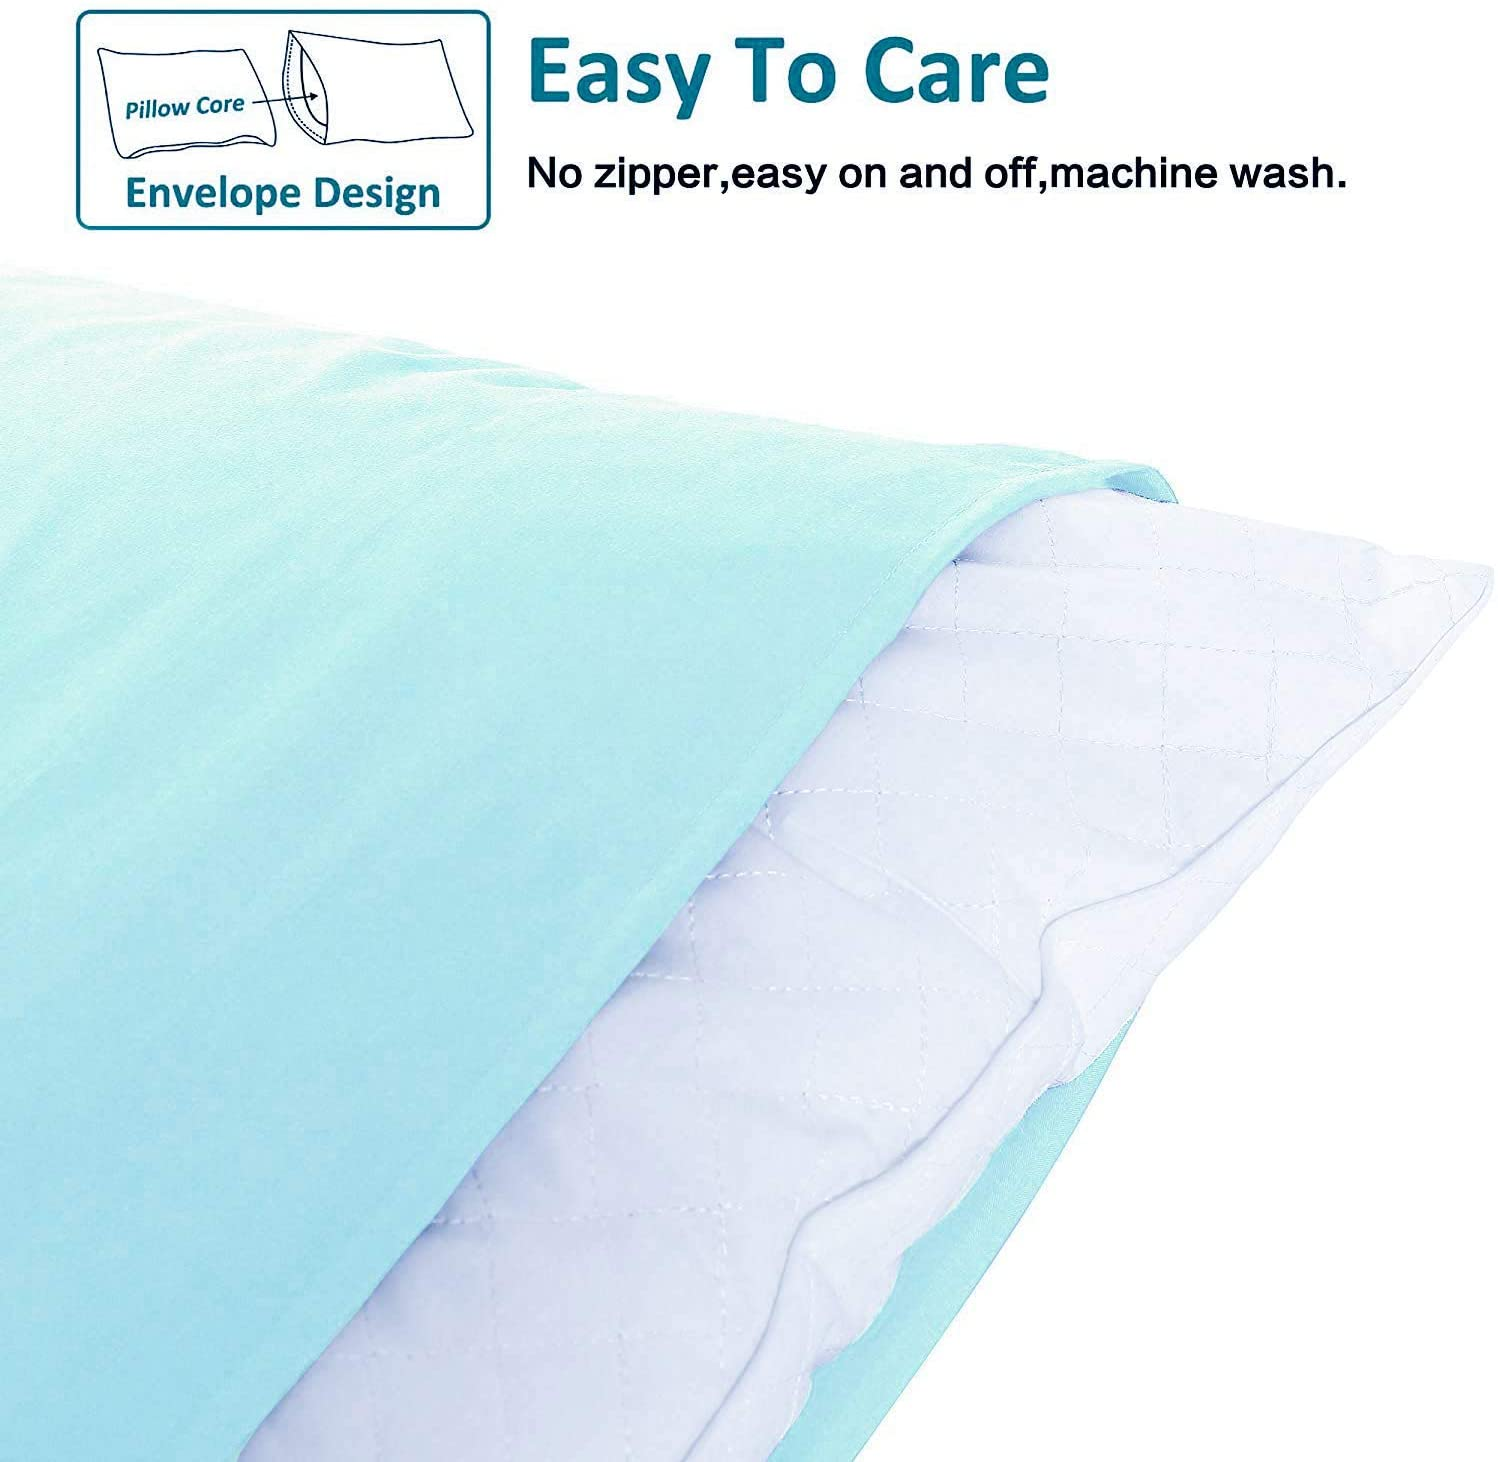  100% Brushed Microfiber Standard Pillow Cases for Kids Set of 2, Super Soft and Cozy, Wrinkle, Fade, Stain Resistant with Envelope Closure Pillowcases, 20X26 Inches, Aqua